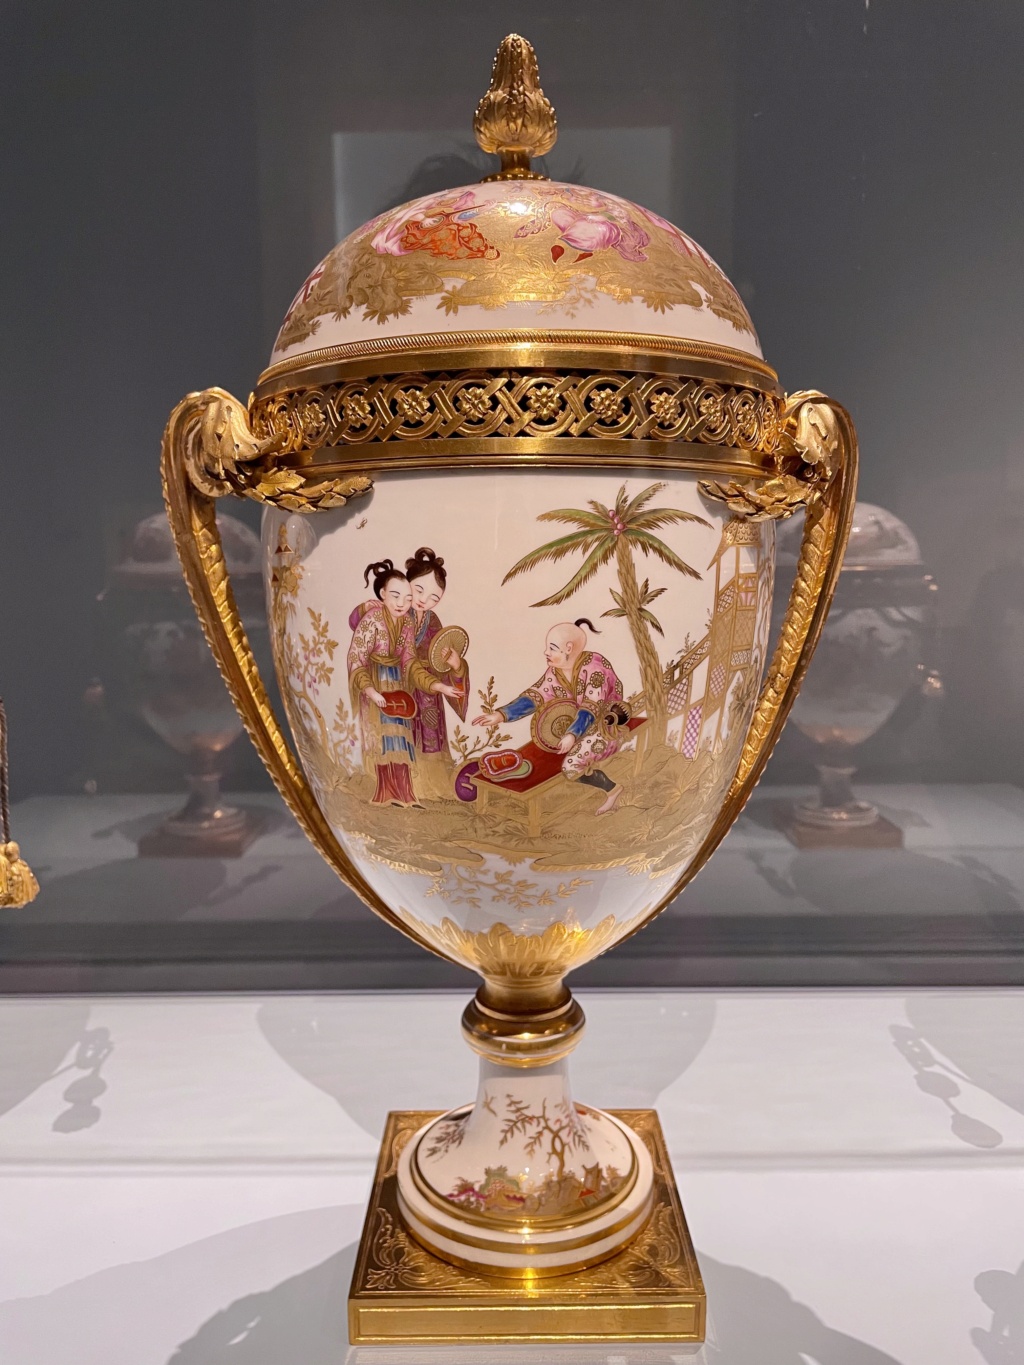 Exposition : Porcelain from Versailles Vases for a King & Queen. Getty Center, Los Angeles 349fb610